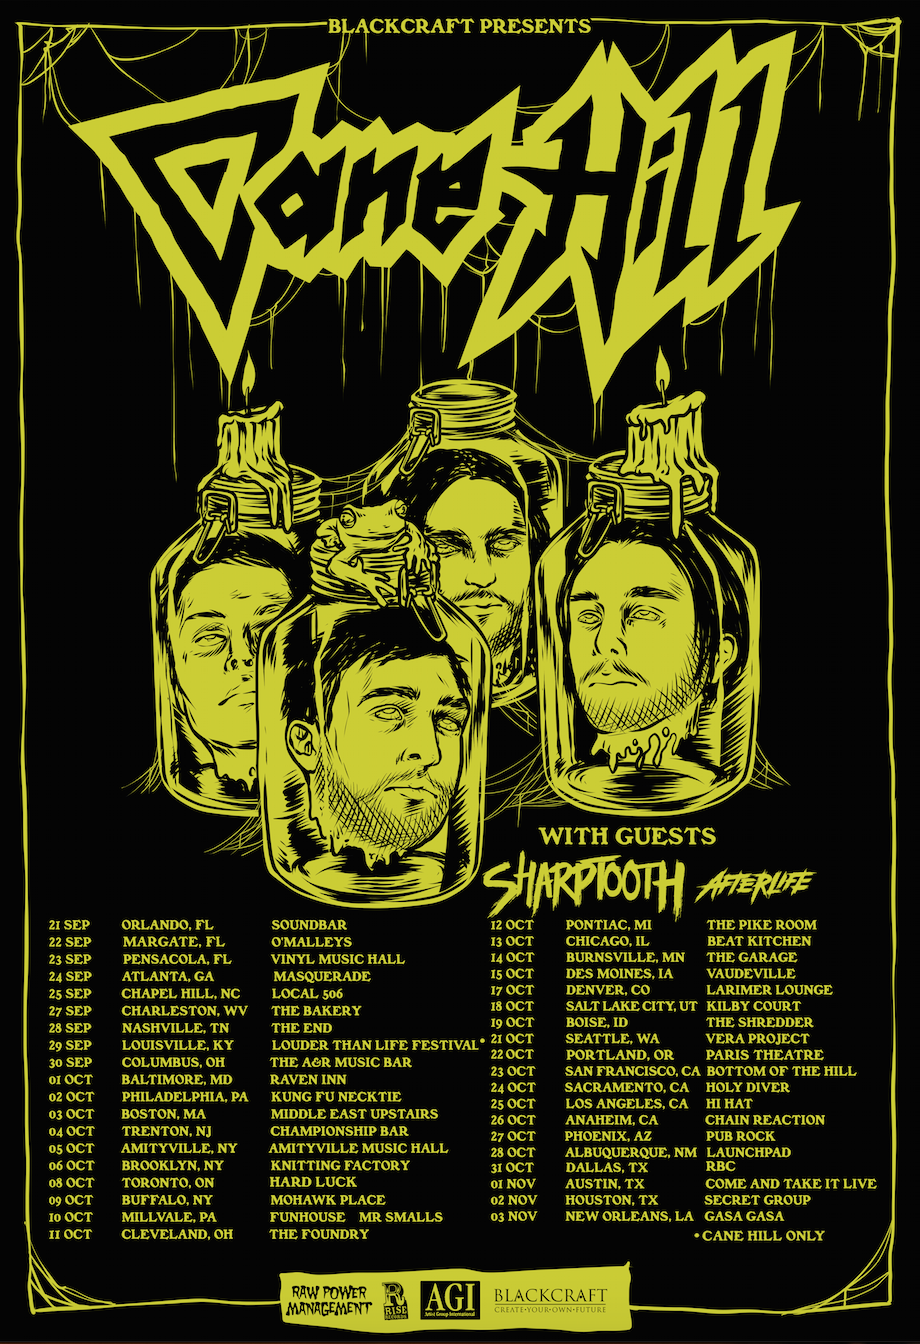 Cane Hill To Embark On First-Ever Headline North American Tour This Fall